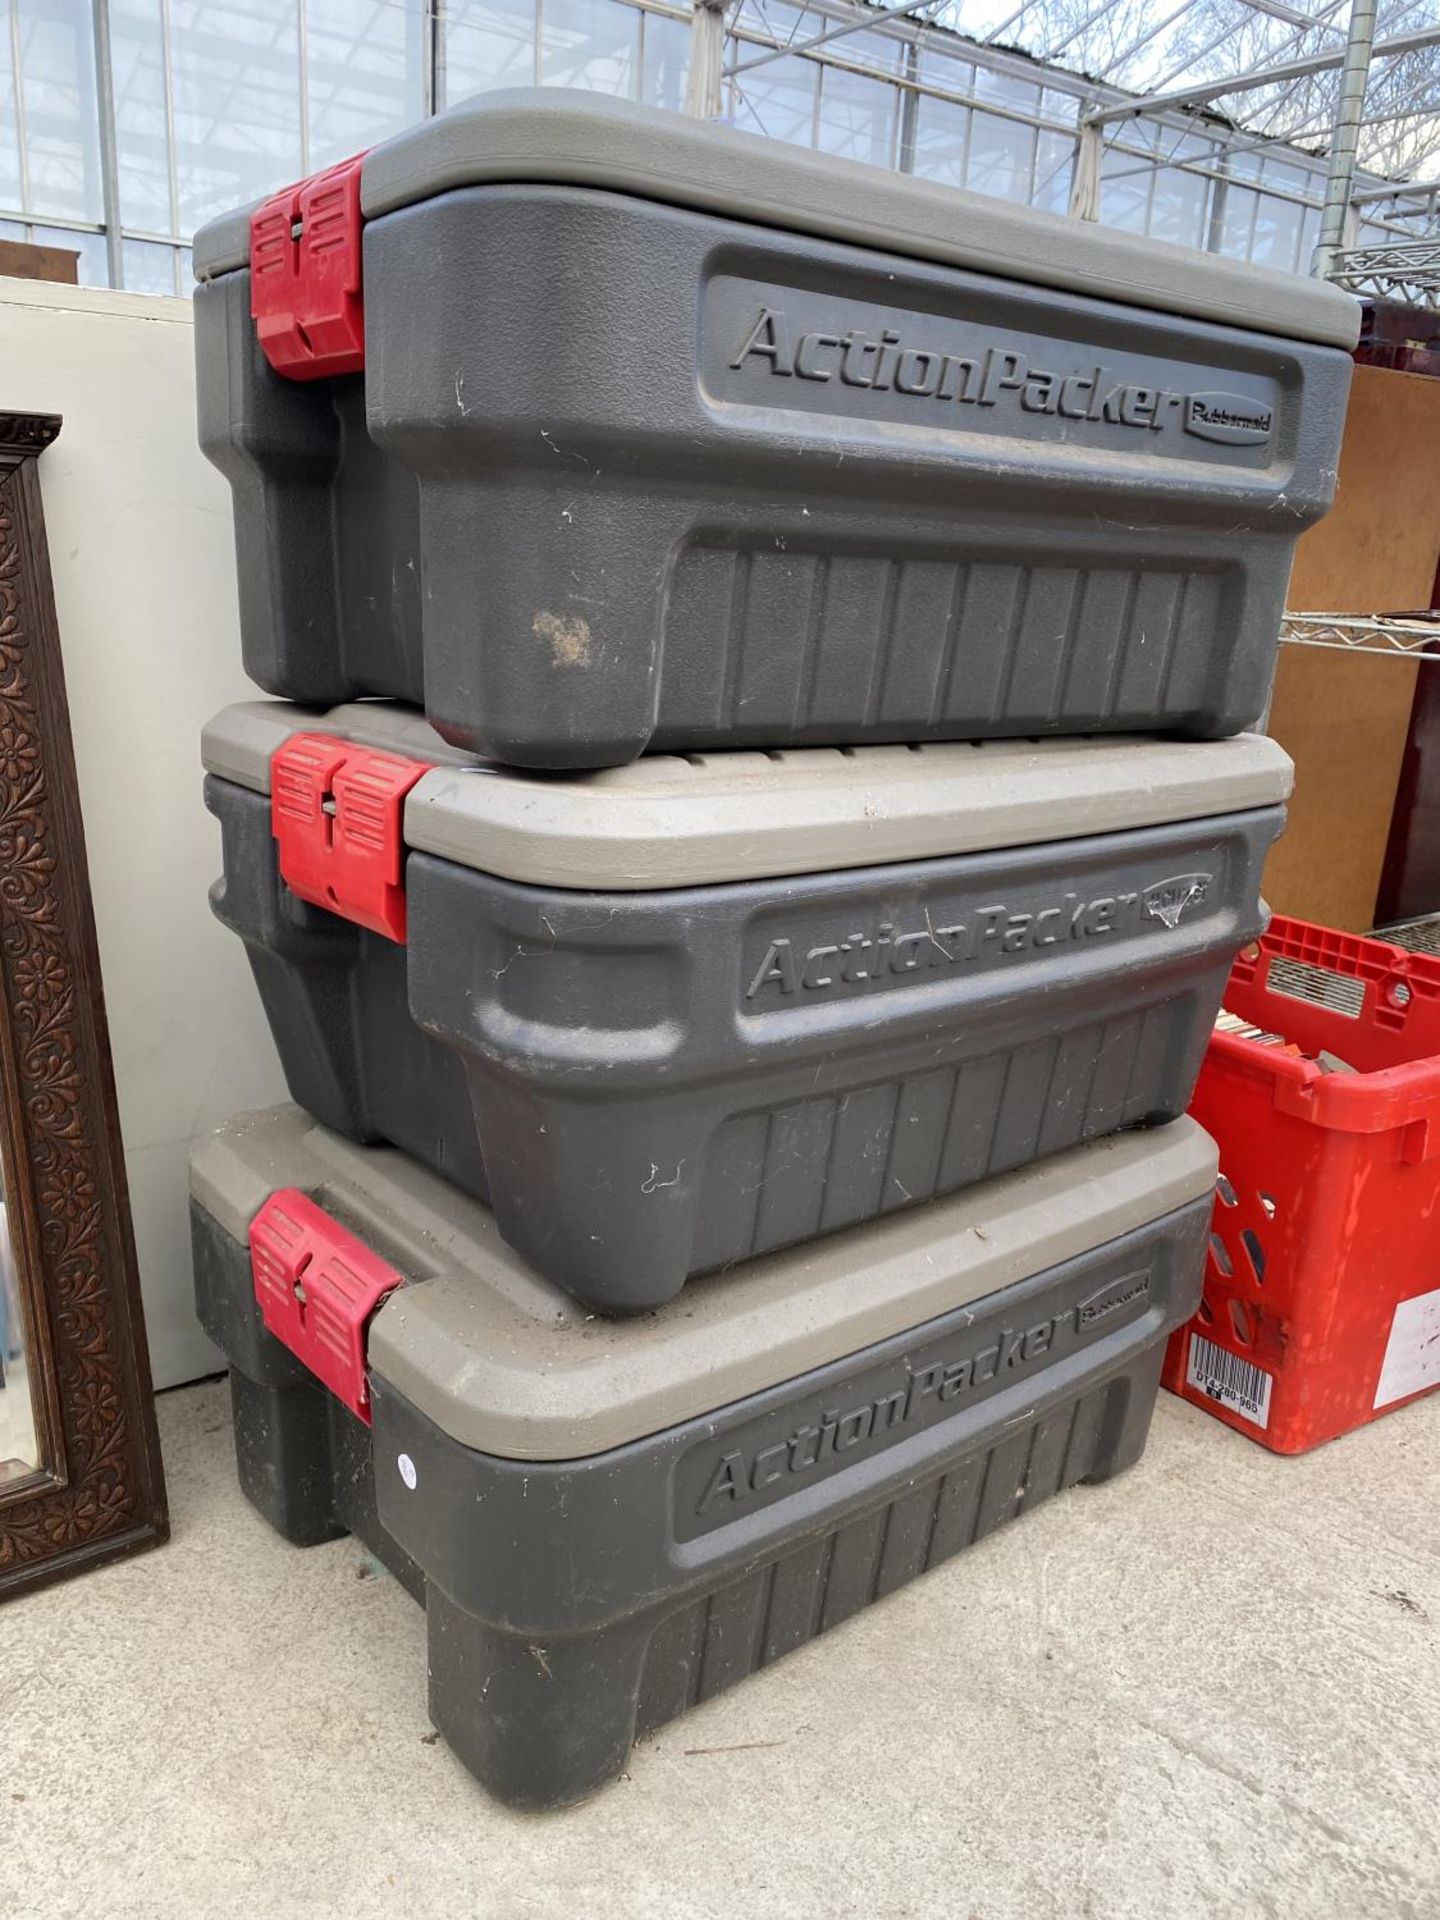 THREE RUBBERMAID ACTIONPACKER STORAGE BOXES - Image 2 of 2